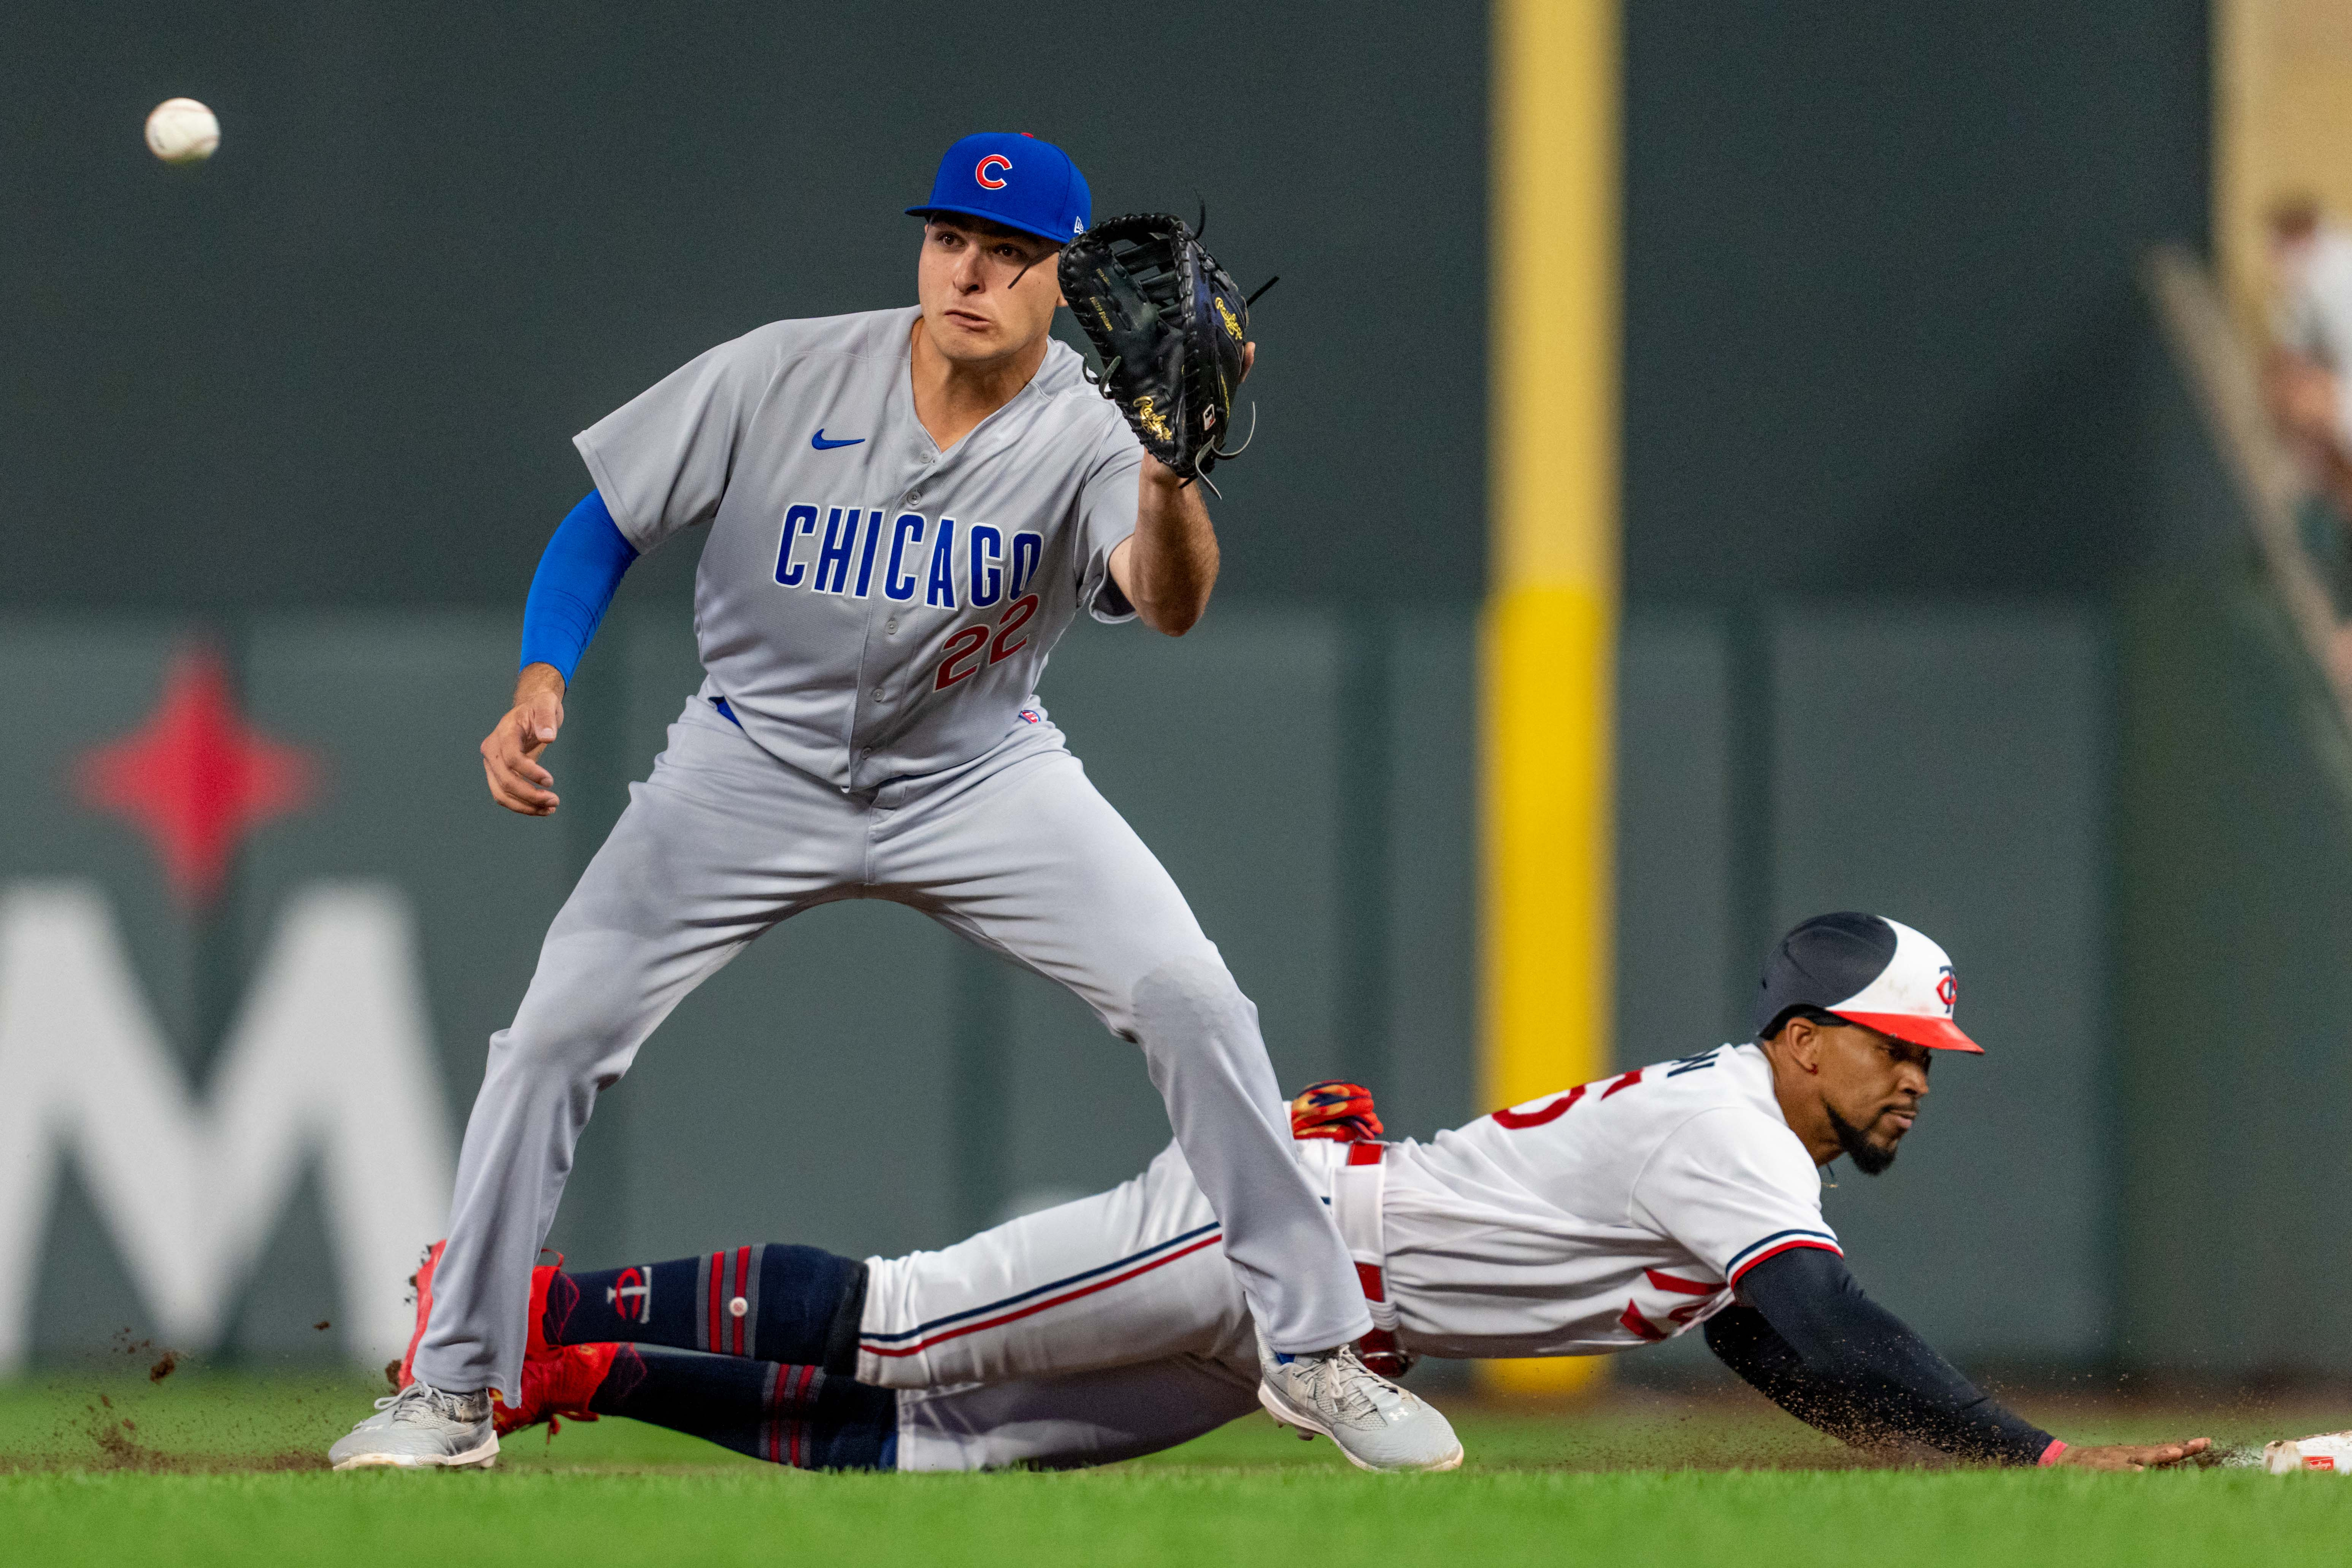 Cubs: Morel caps off late rally with a walk-off blast